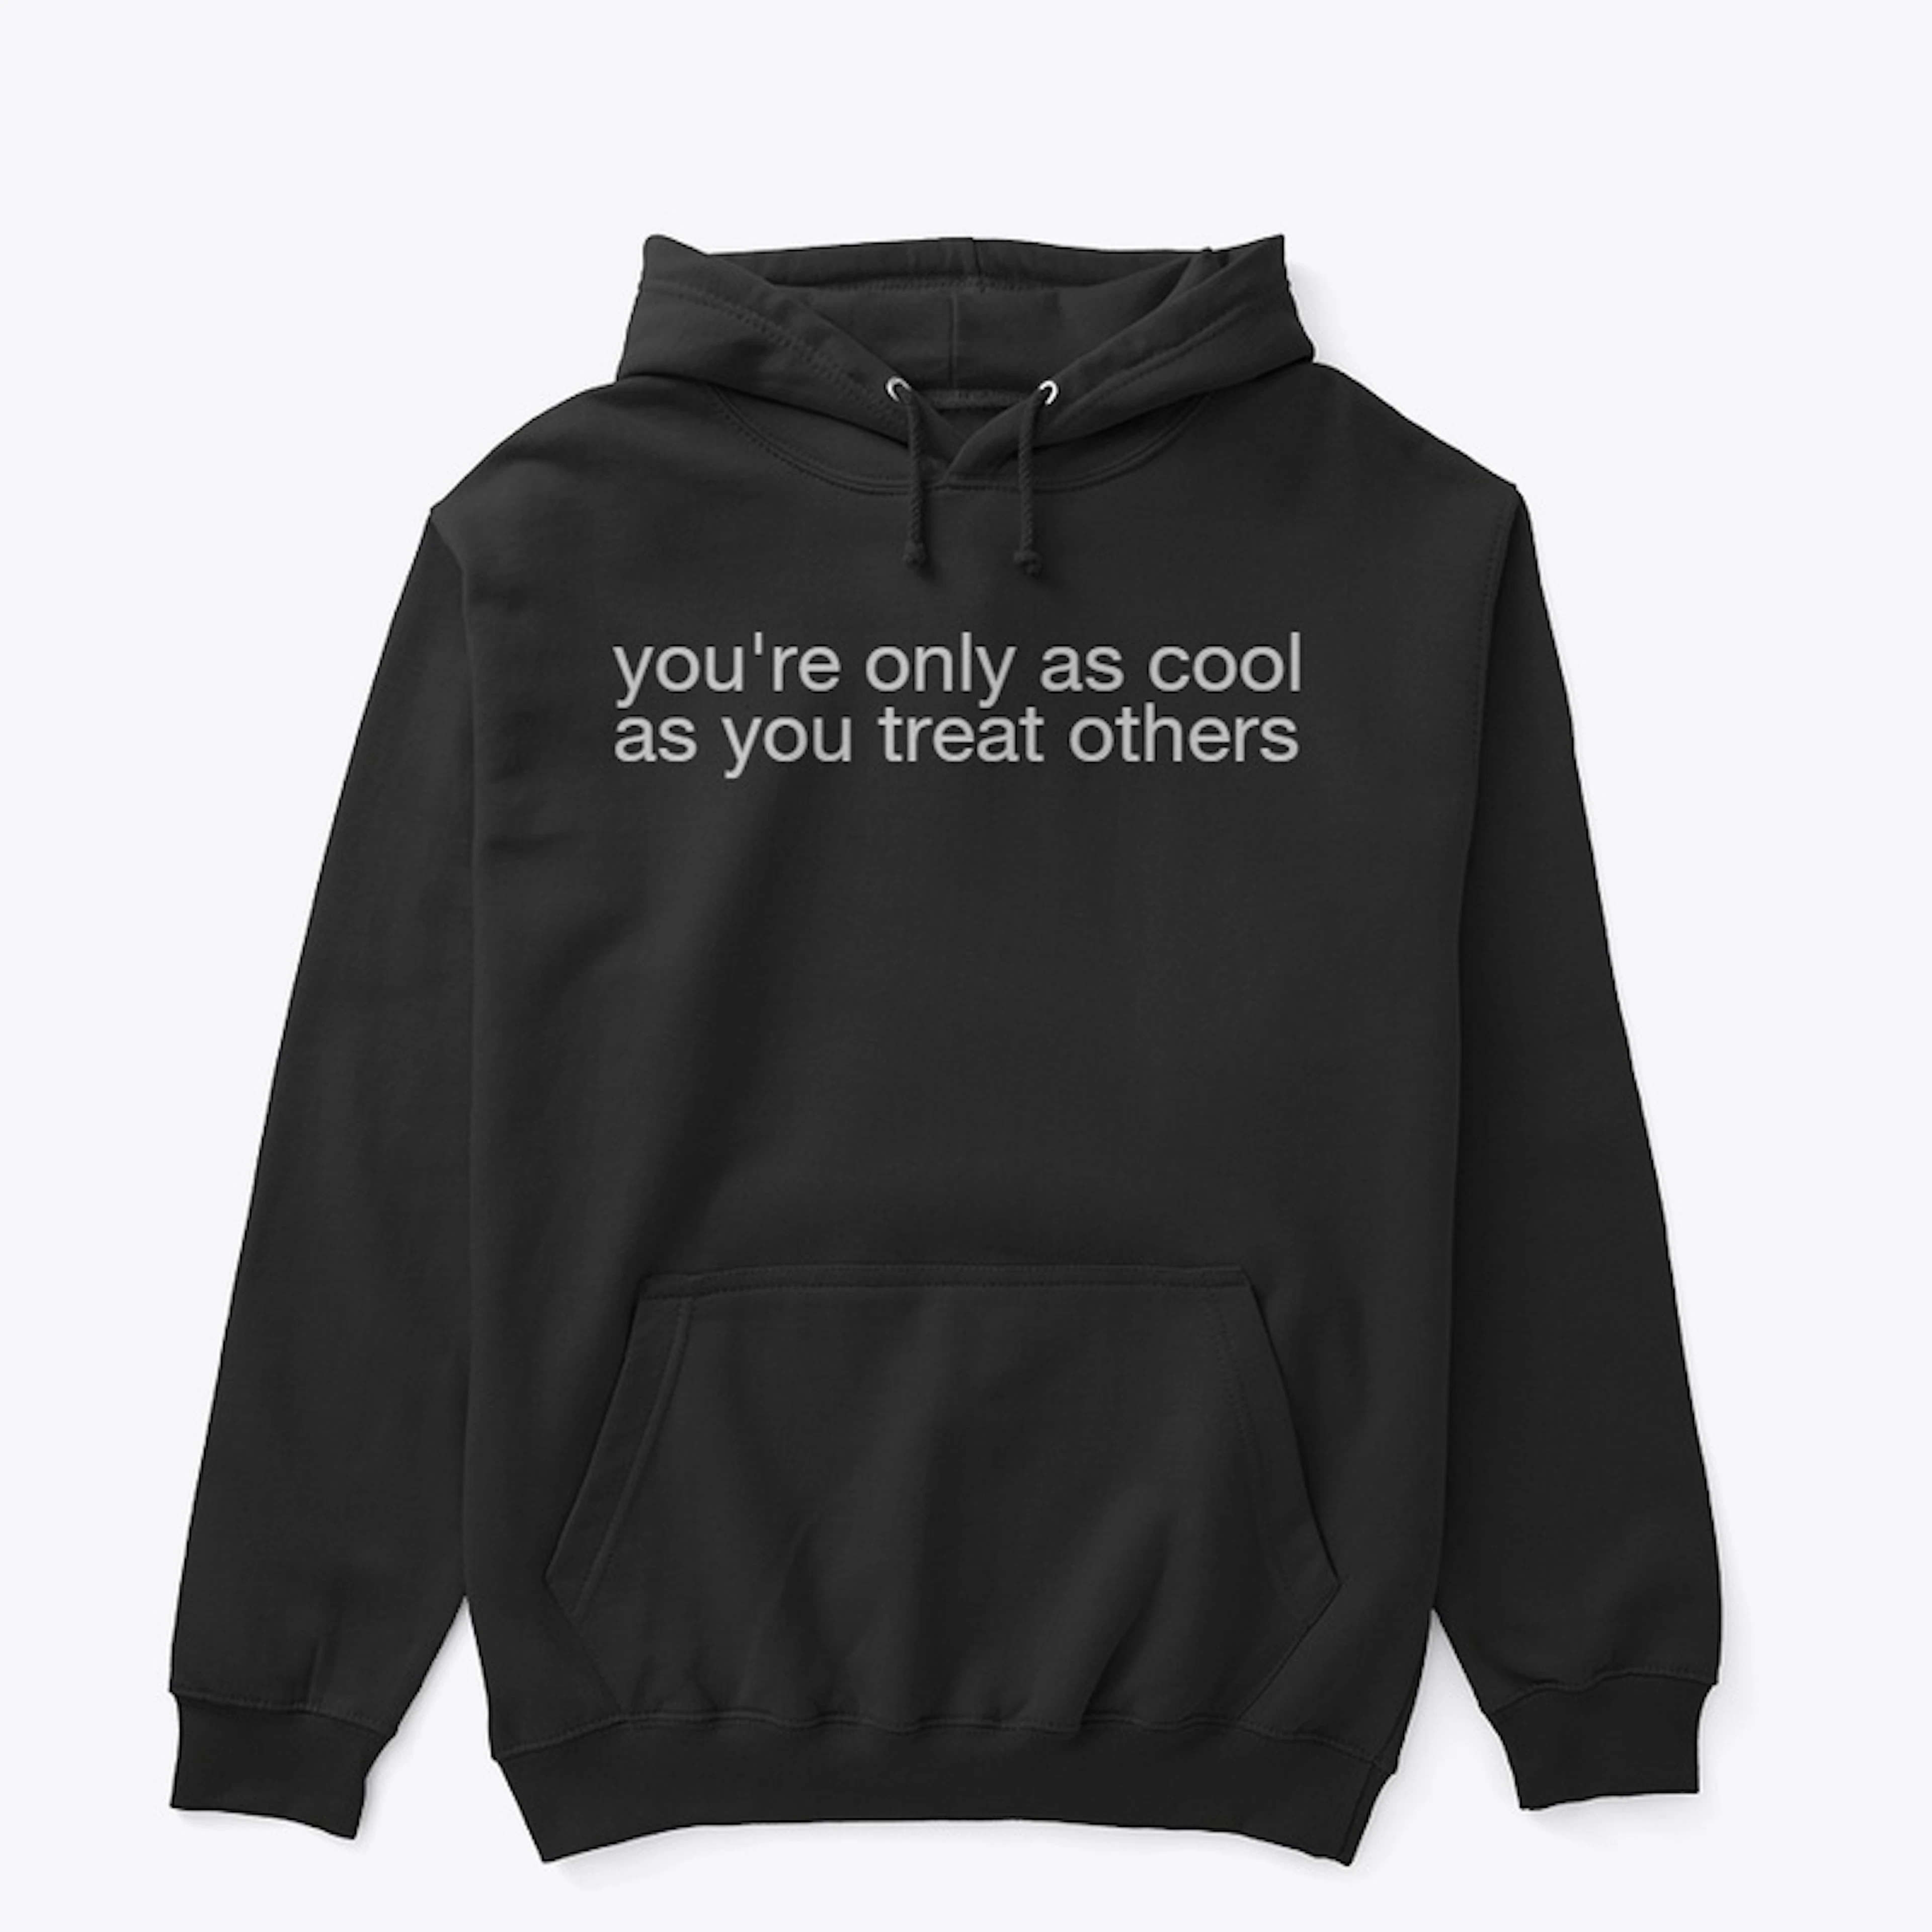 "you're only as cool (COLORED)